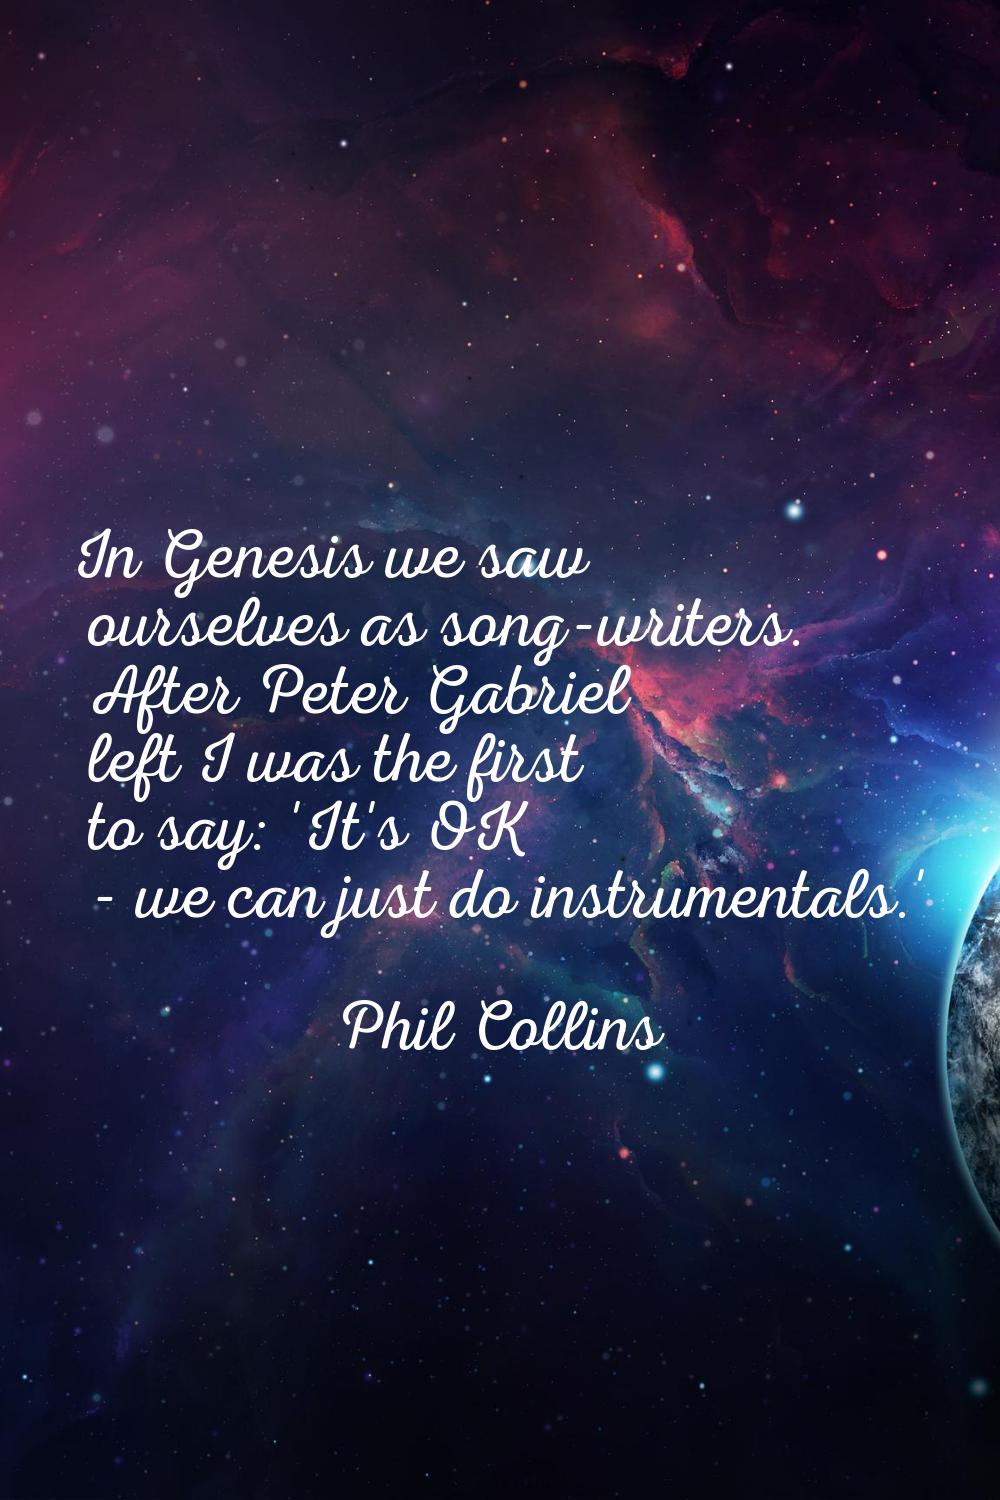 In Genesis we saw ourselves as song-writers. After Peter Gabriel left I was the first to say: 'It's